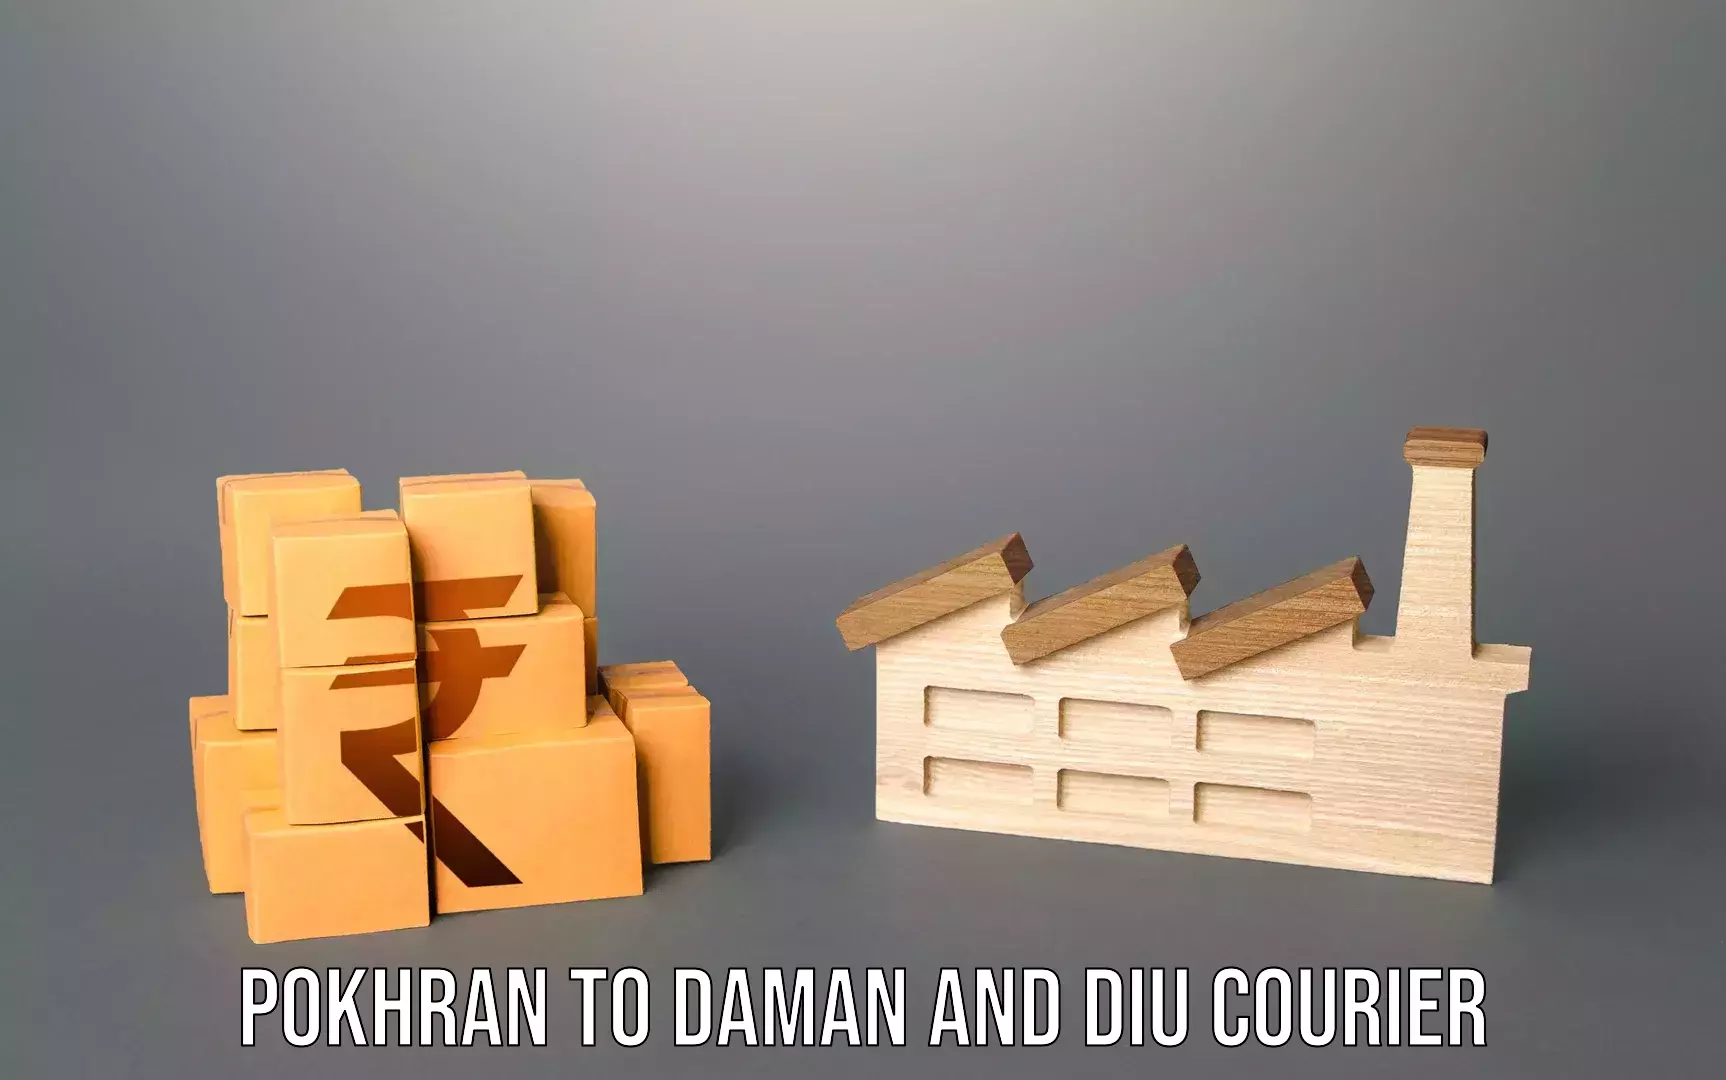 Luggage shipment specialists Pokhran to Daman and Diu